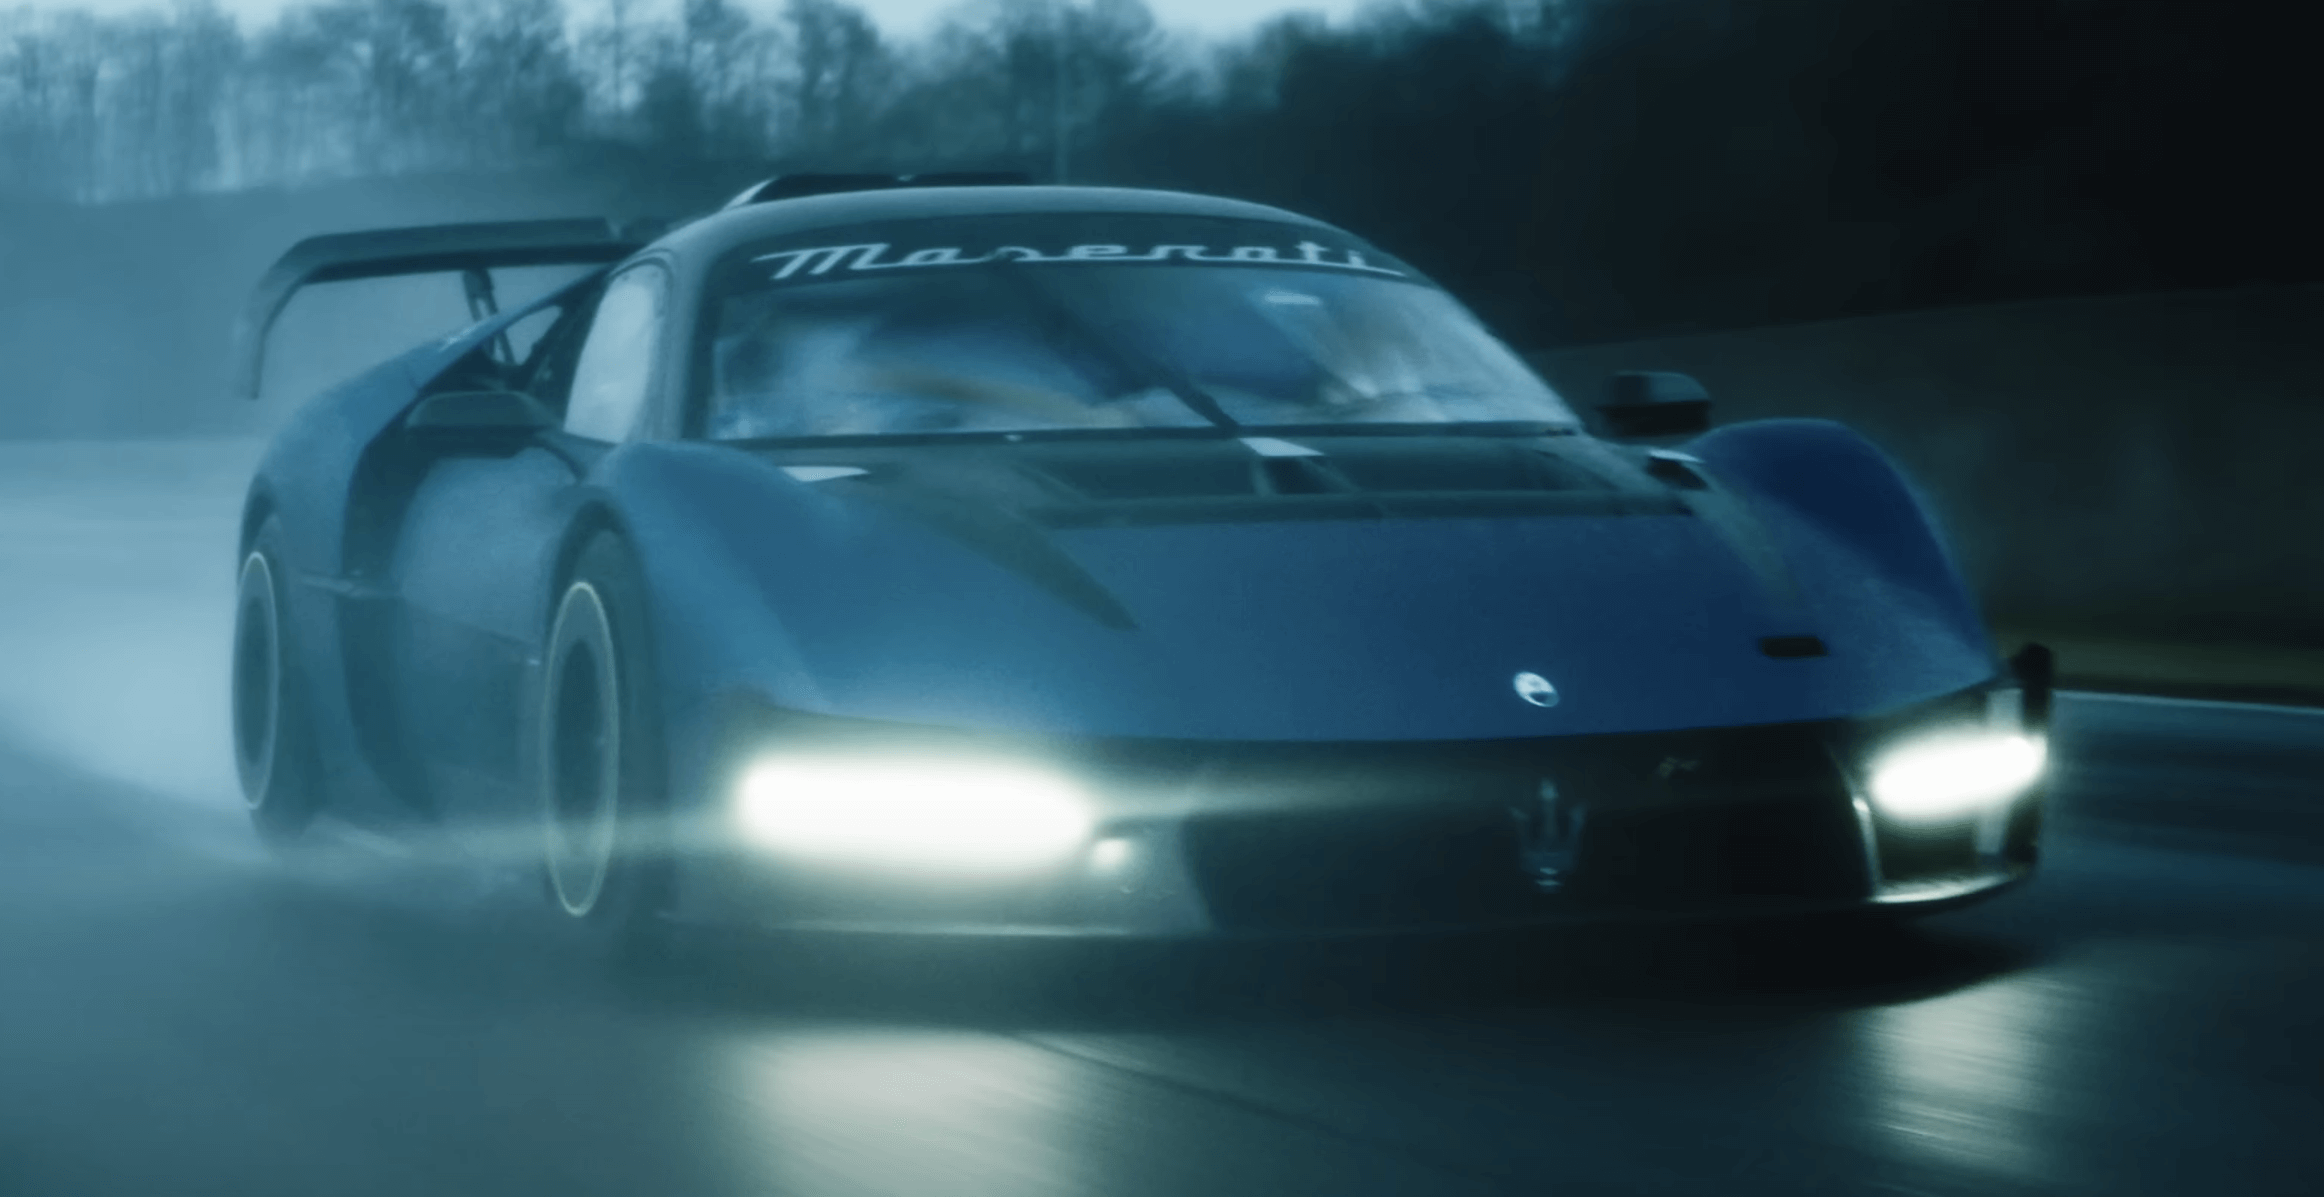 Maserati showed the extreme track supercar MCXtrema in motion